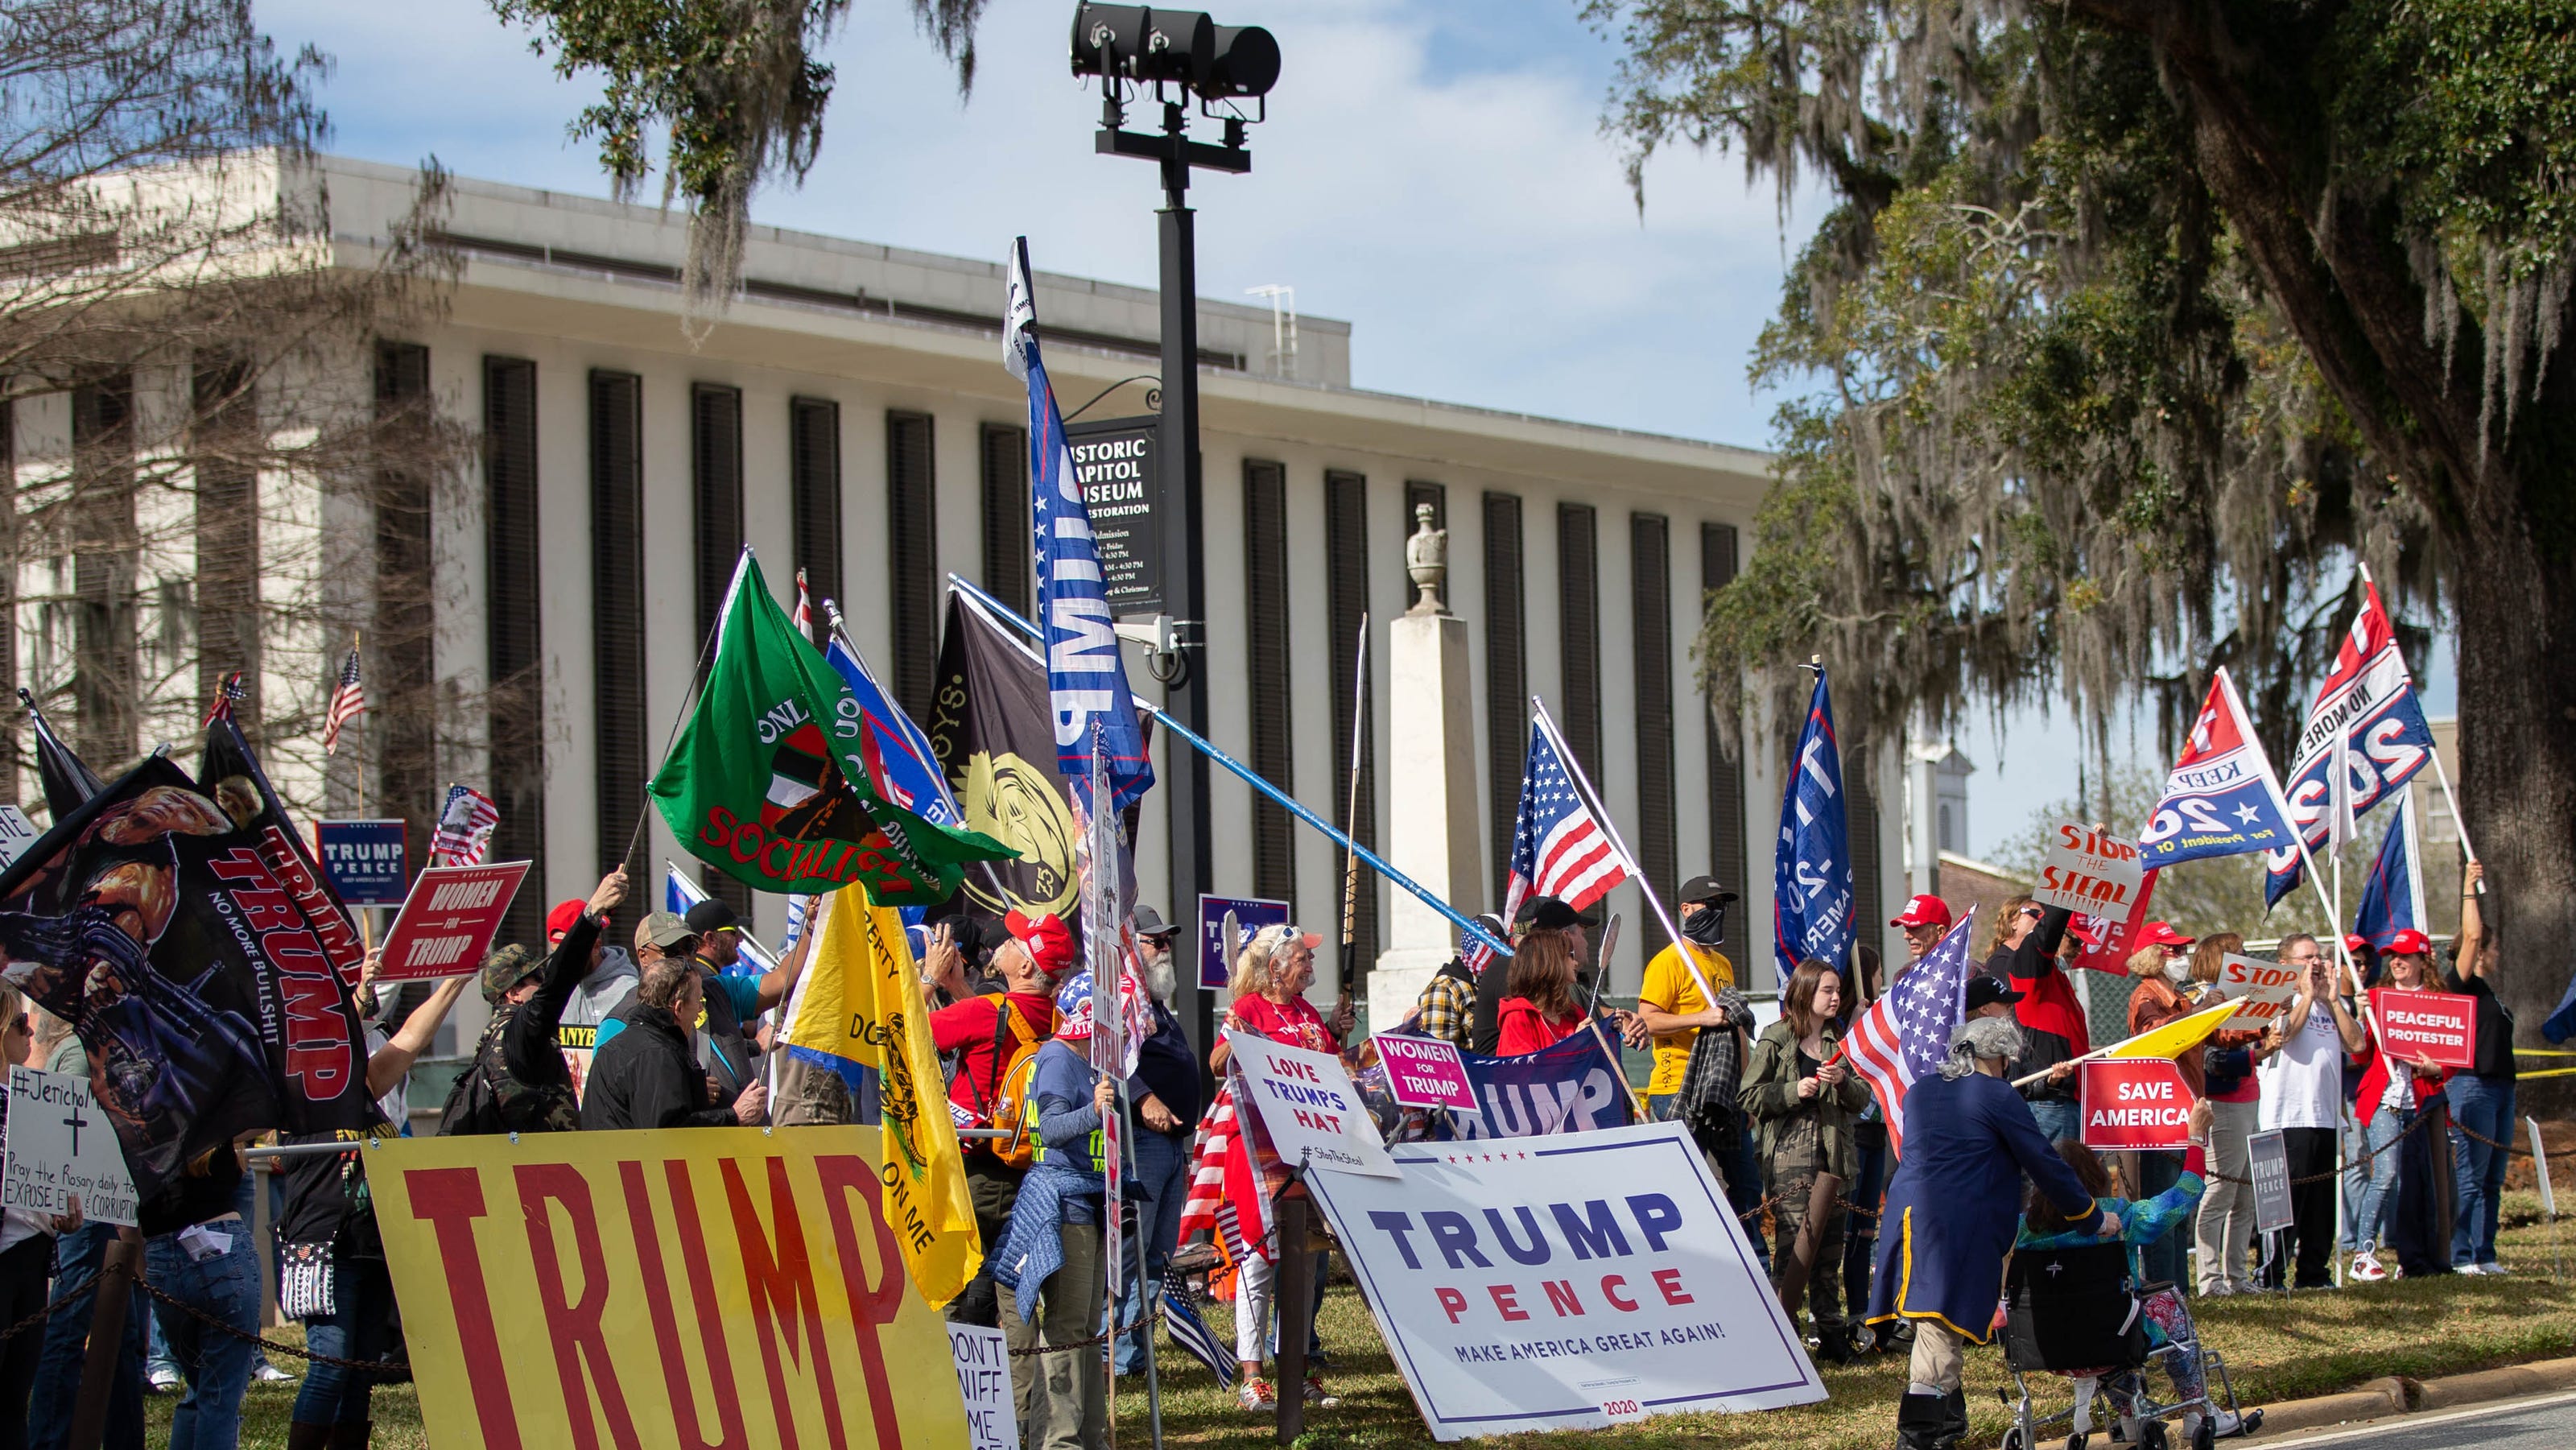 Trump supporters, Proud Boys protest in front of Old Florida Capitol